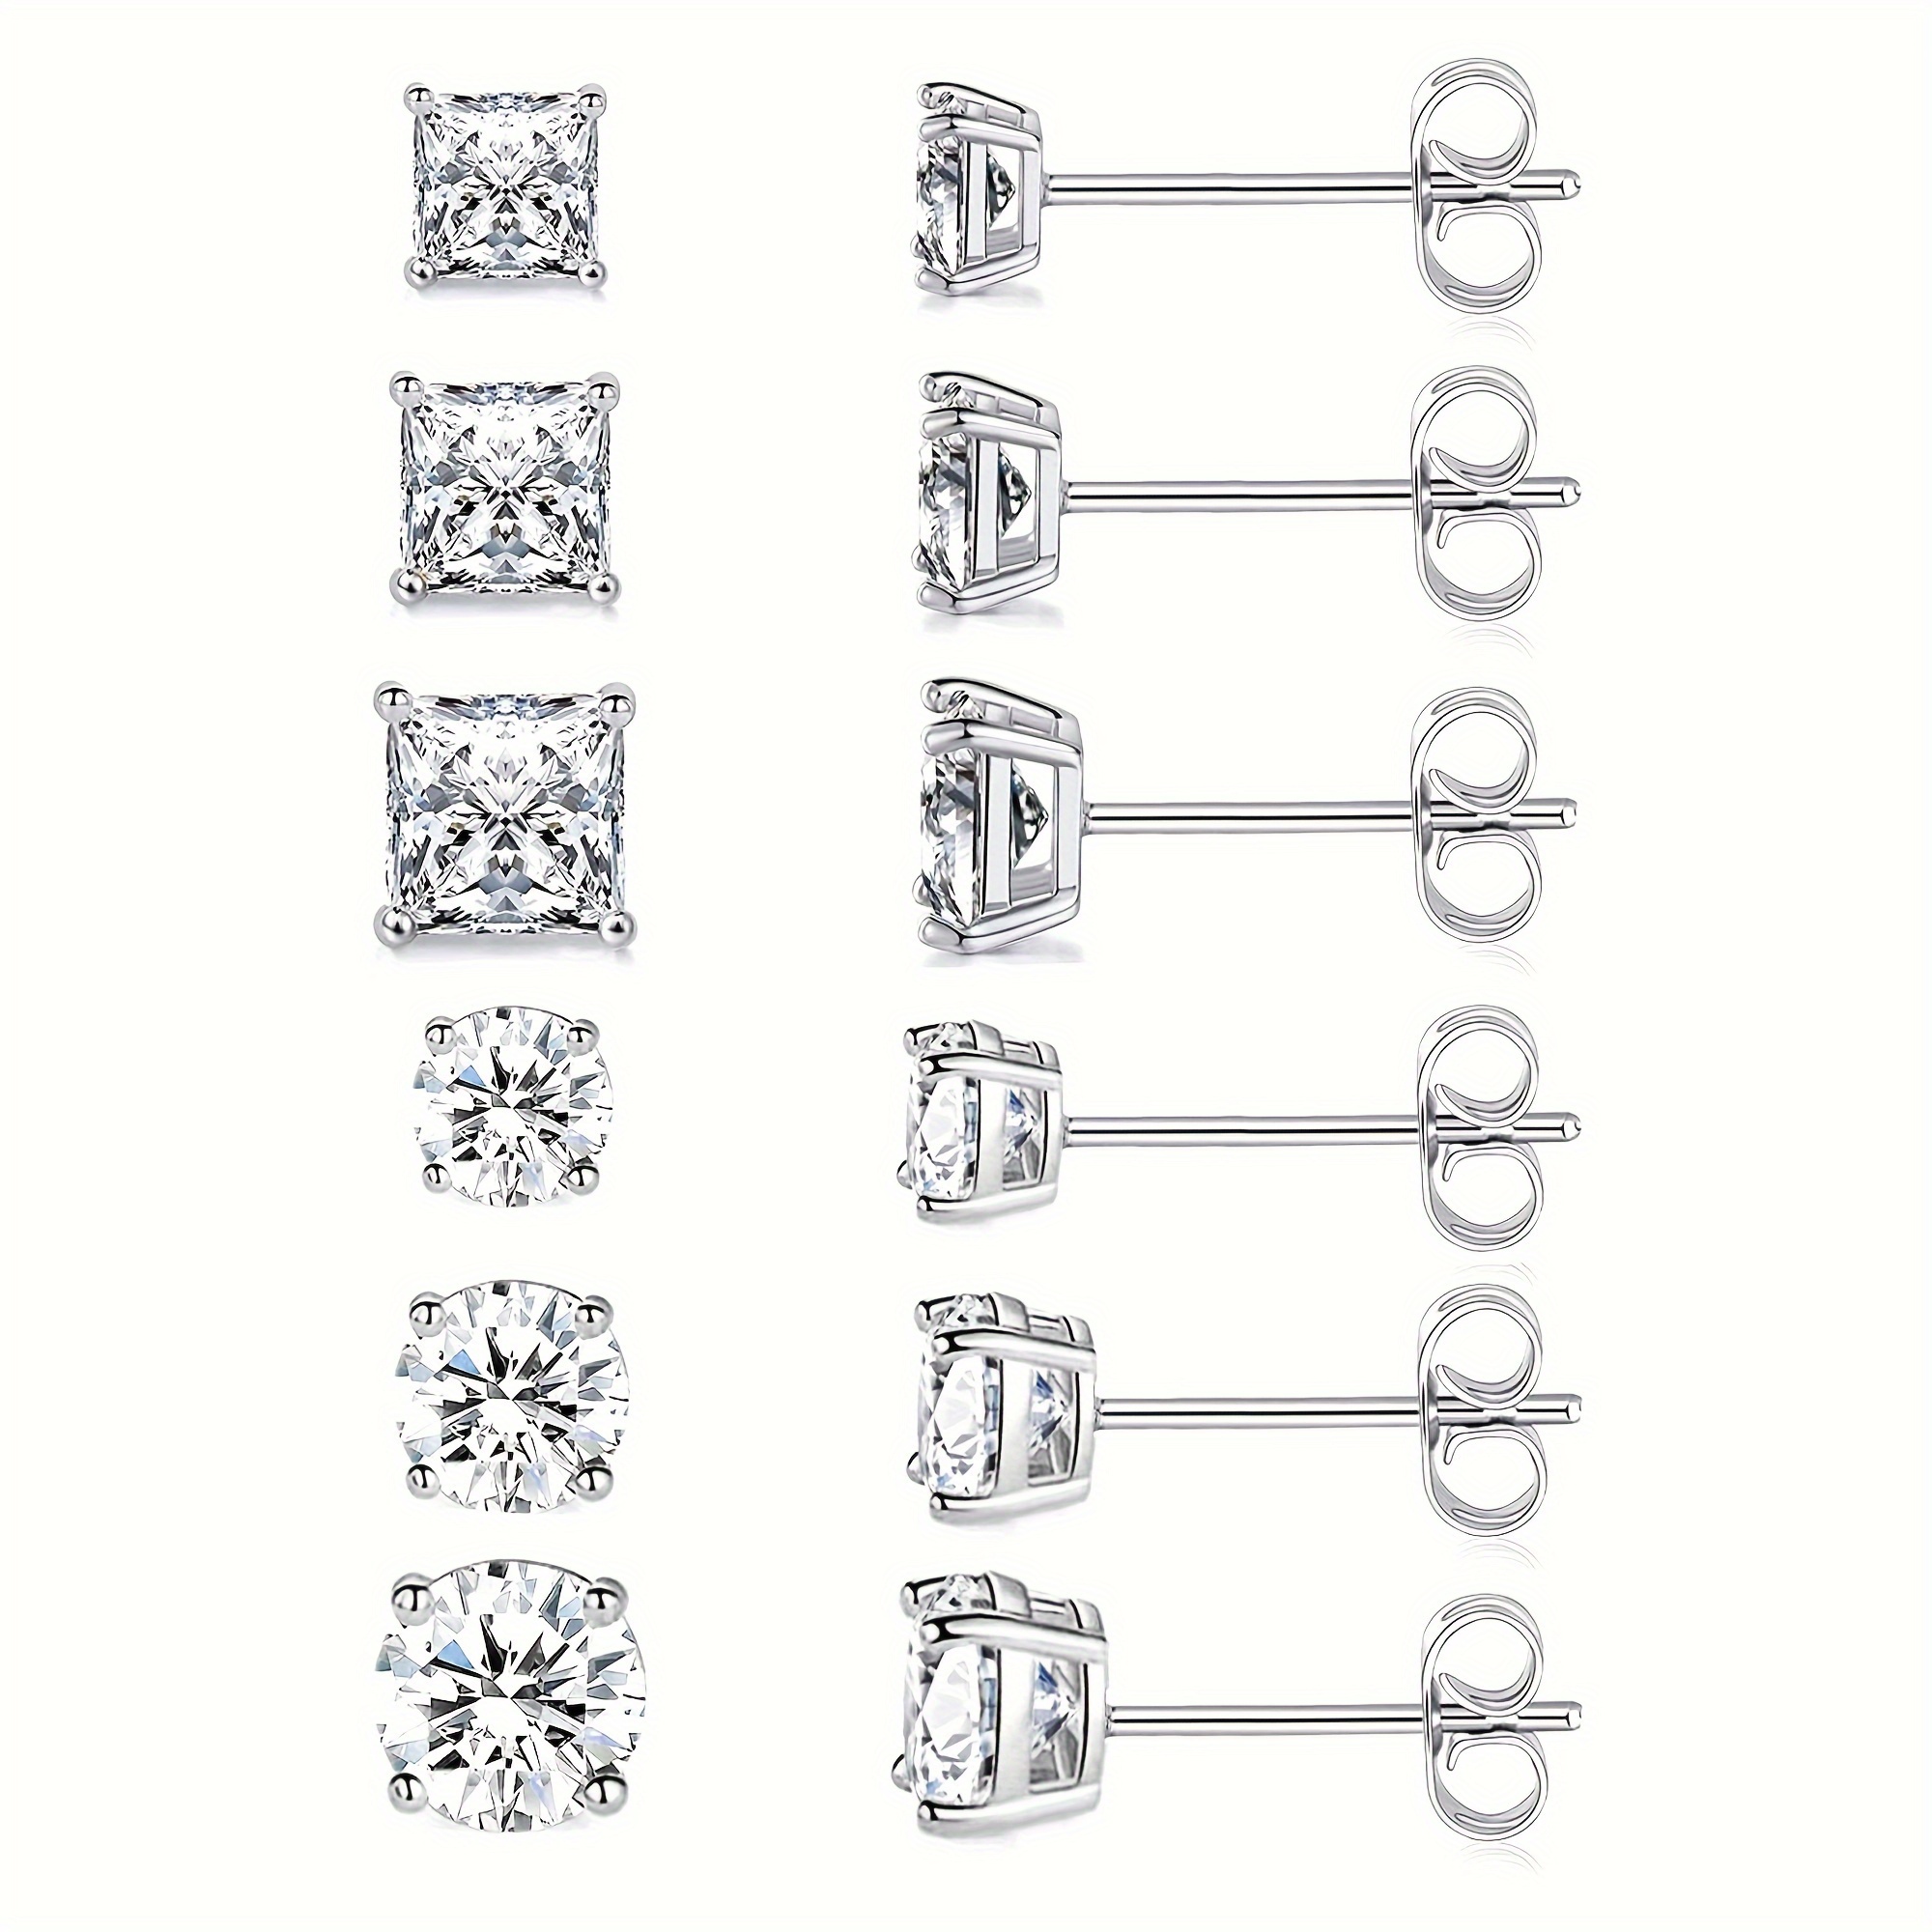 

6pairs Round Square Stud Earrings, Cubic Zirconia Stud Earrings For Men, Daily Ear Jewelry